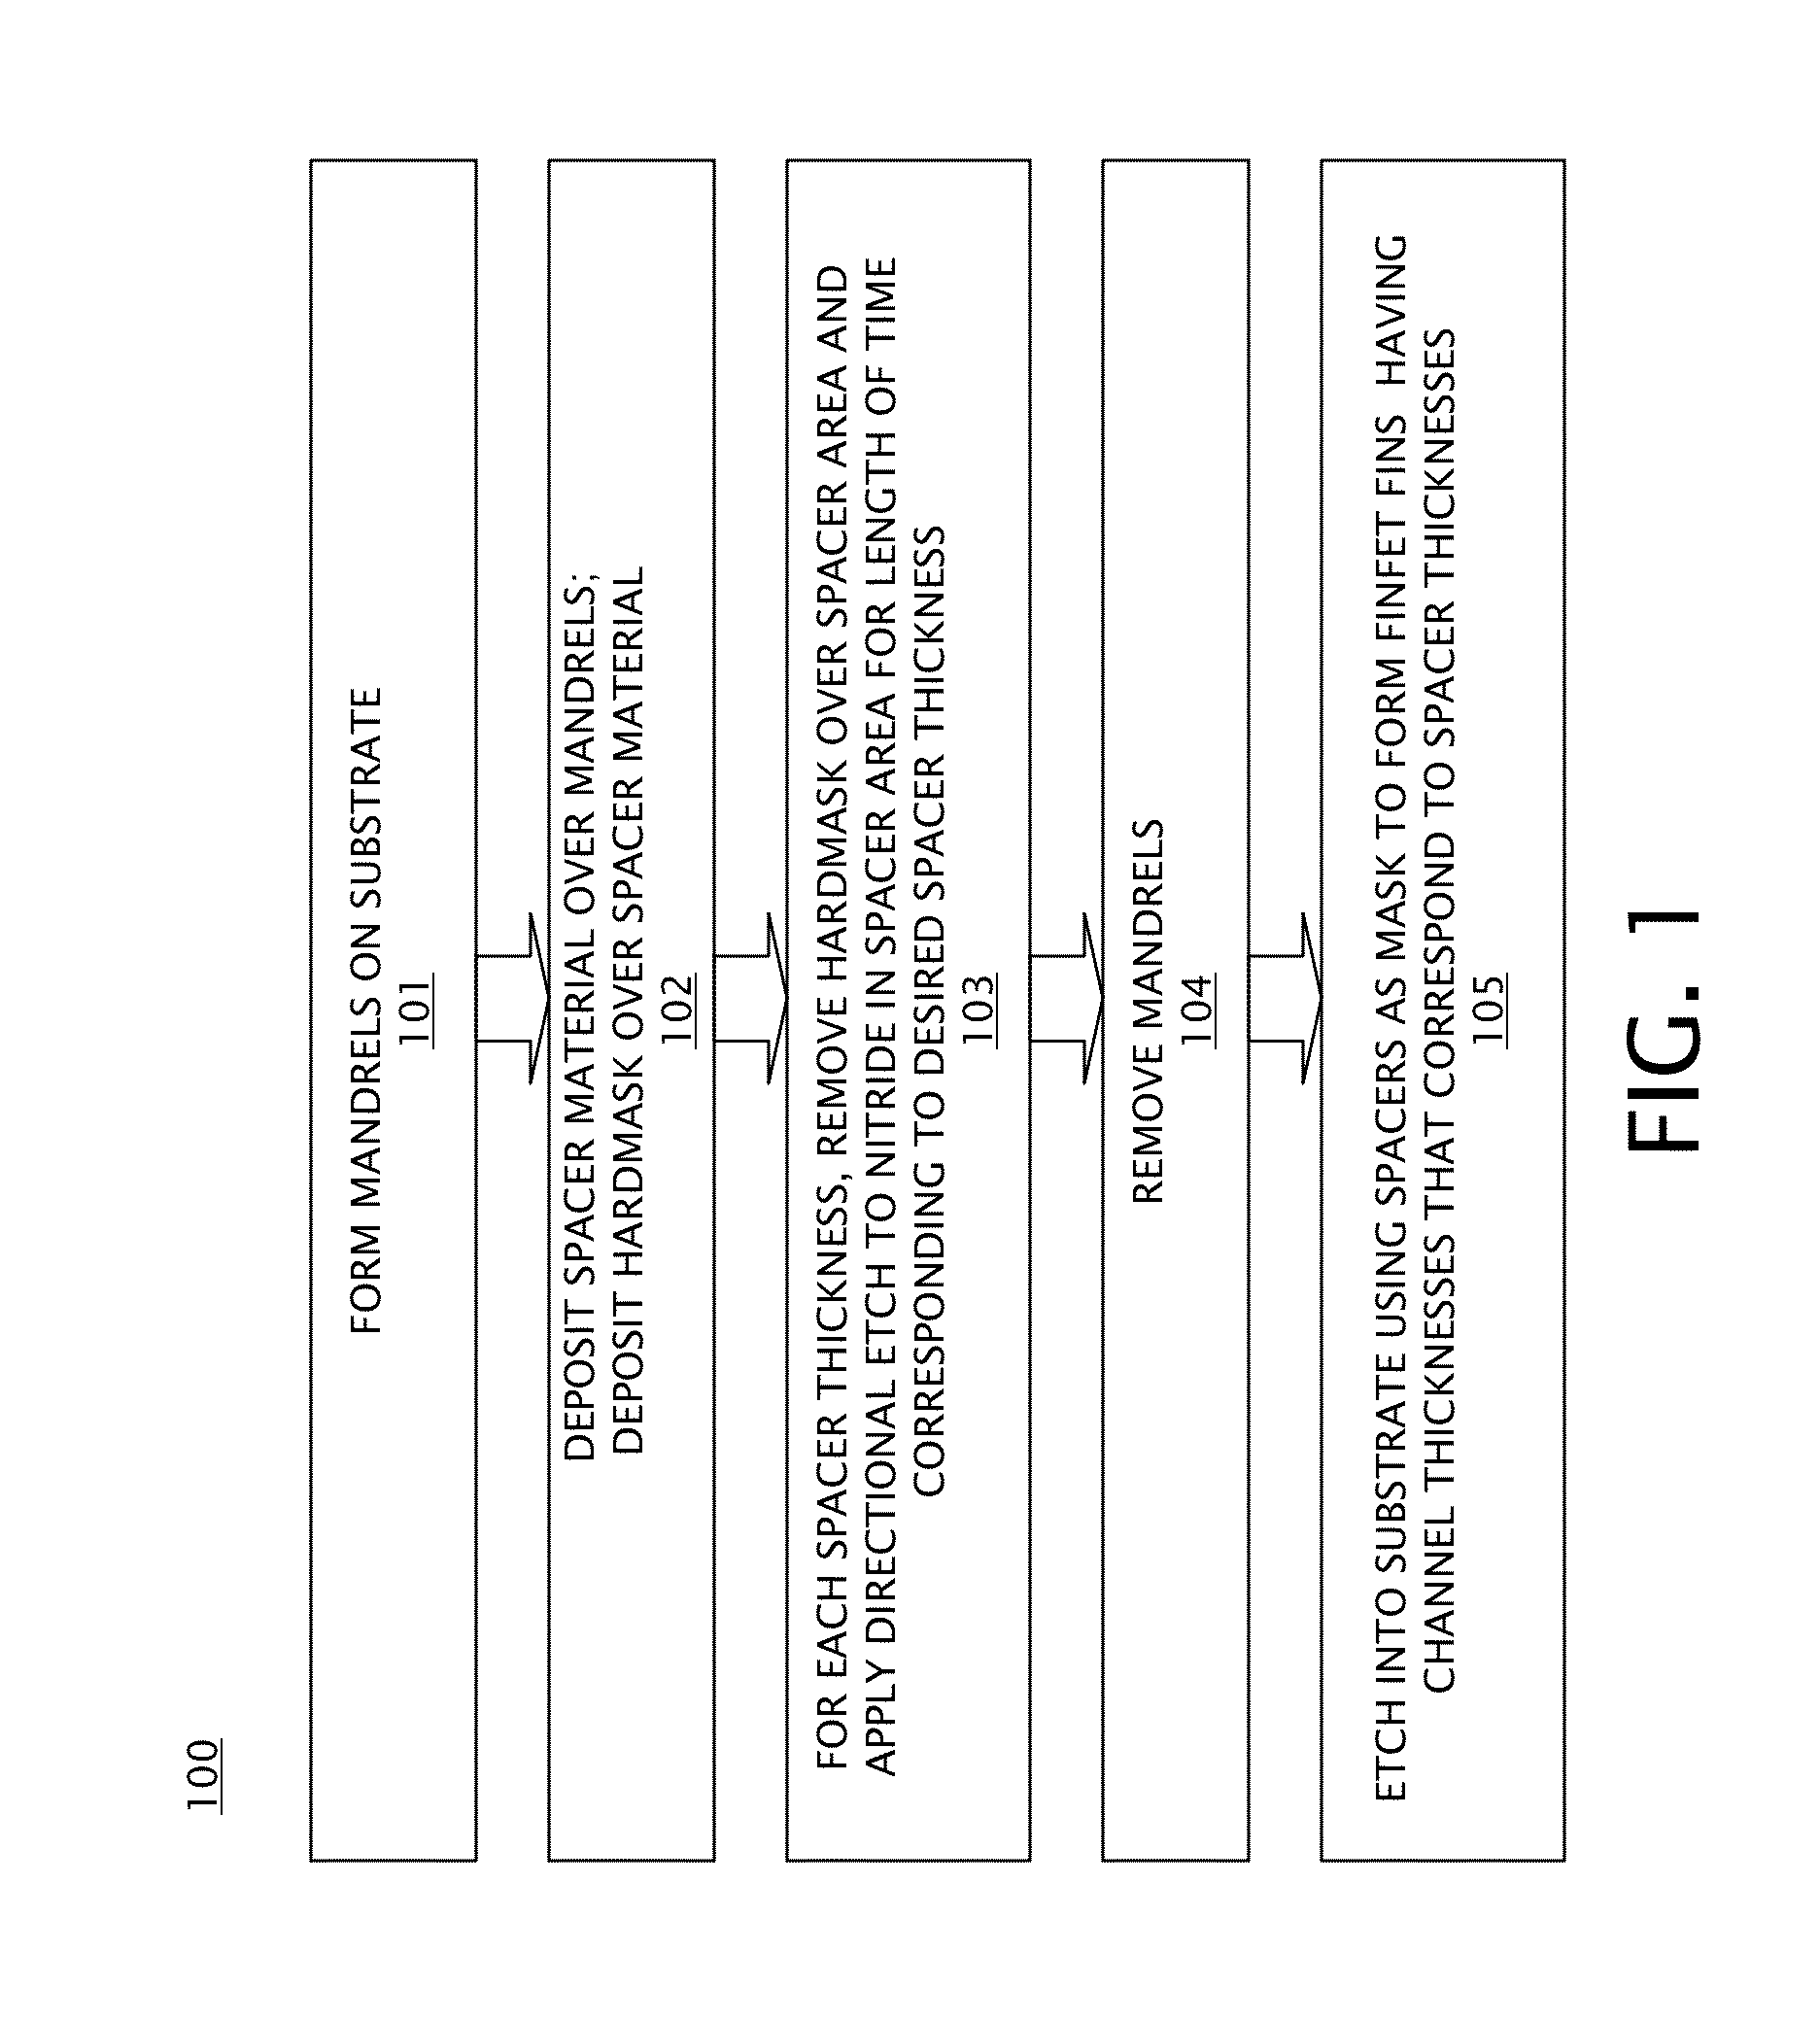 Fin field effect transistor with variable channel thickness for threshold voltage tuning